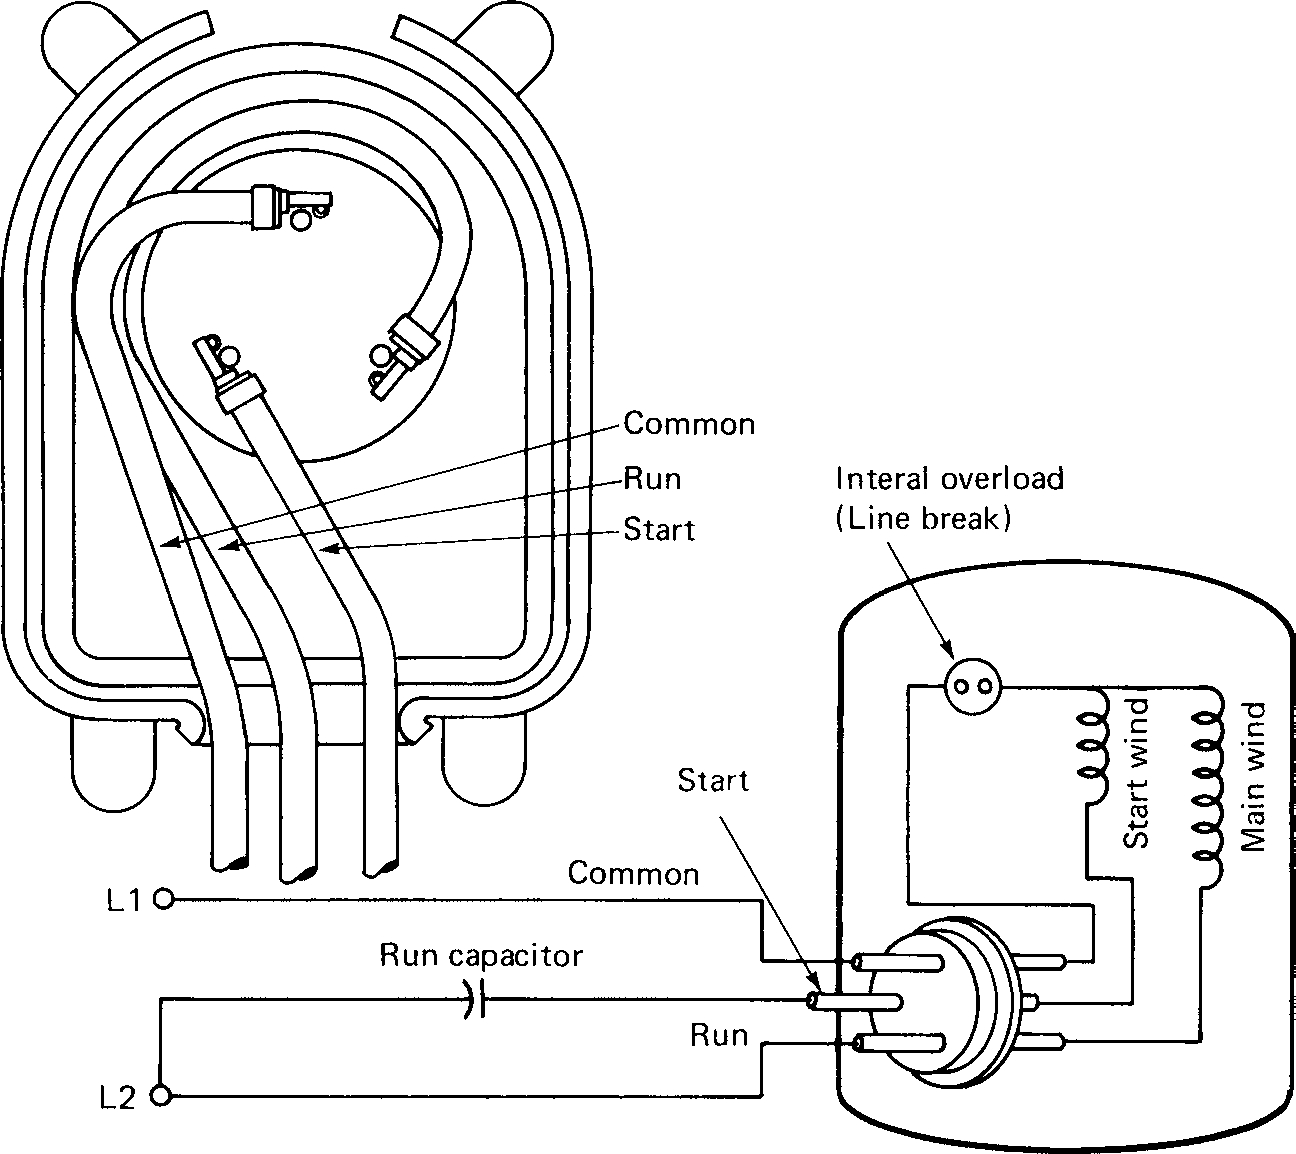 120 Volt Capacitor Wiring Diagram | Wiring Library - Single Phase Motor Wiring Diagram With Capacitor Start